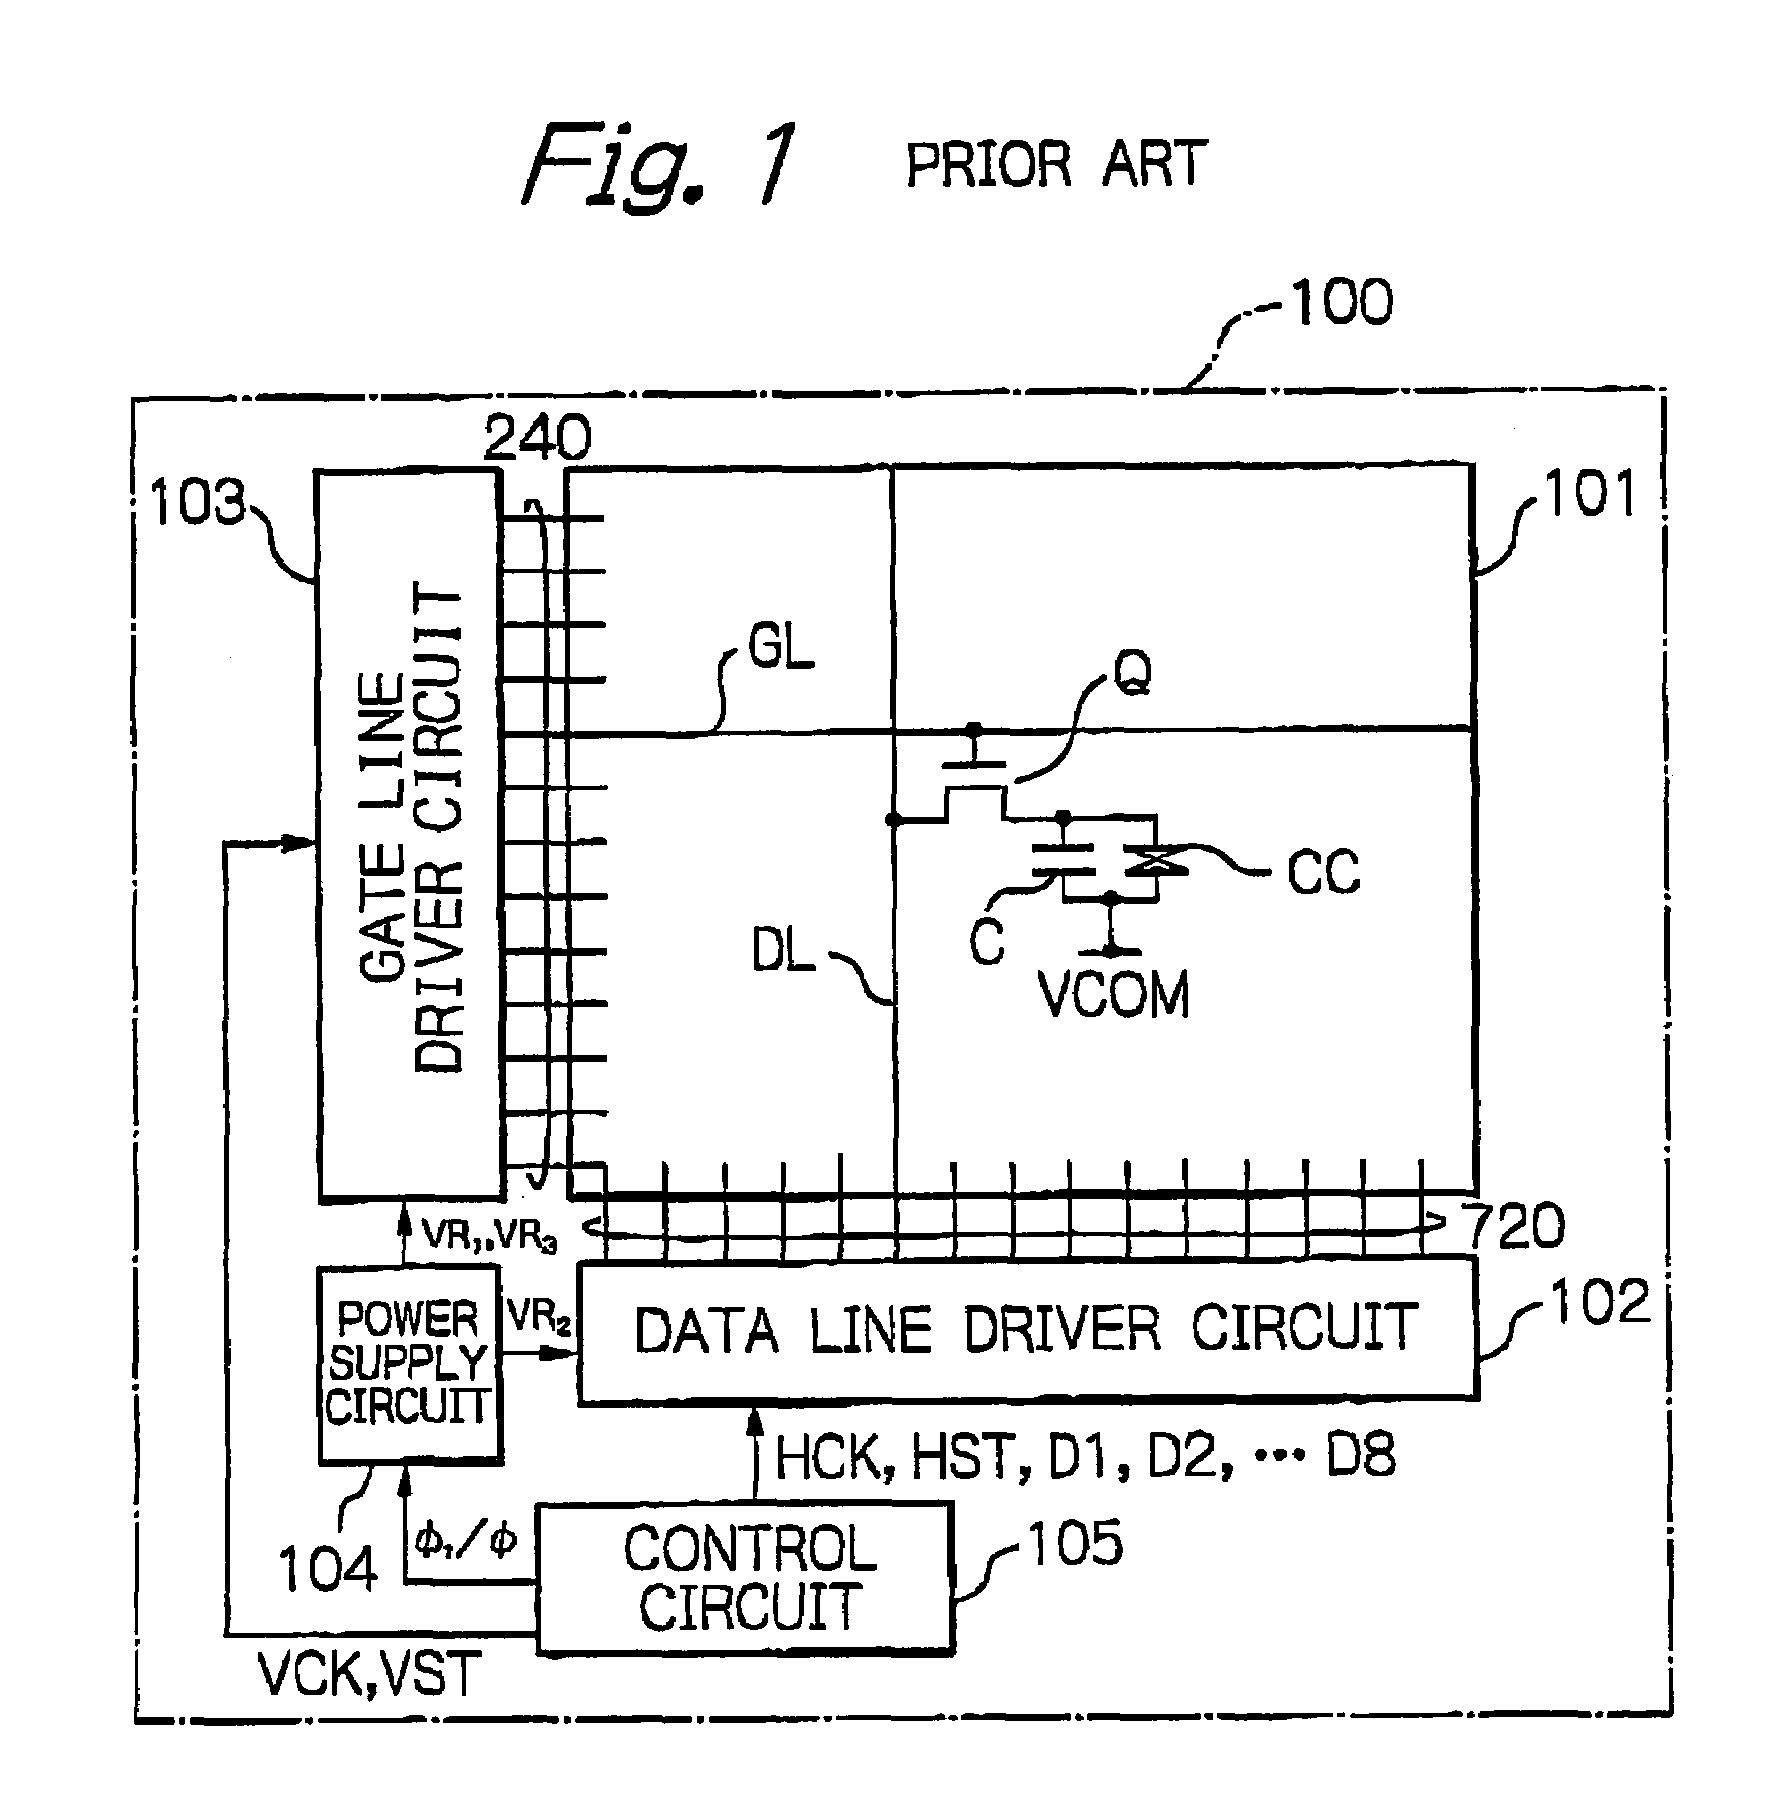 Power supply circuit including stably operating voltage regulators